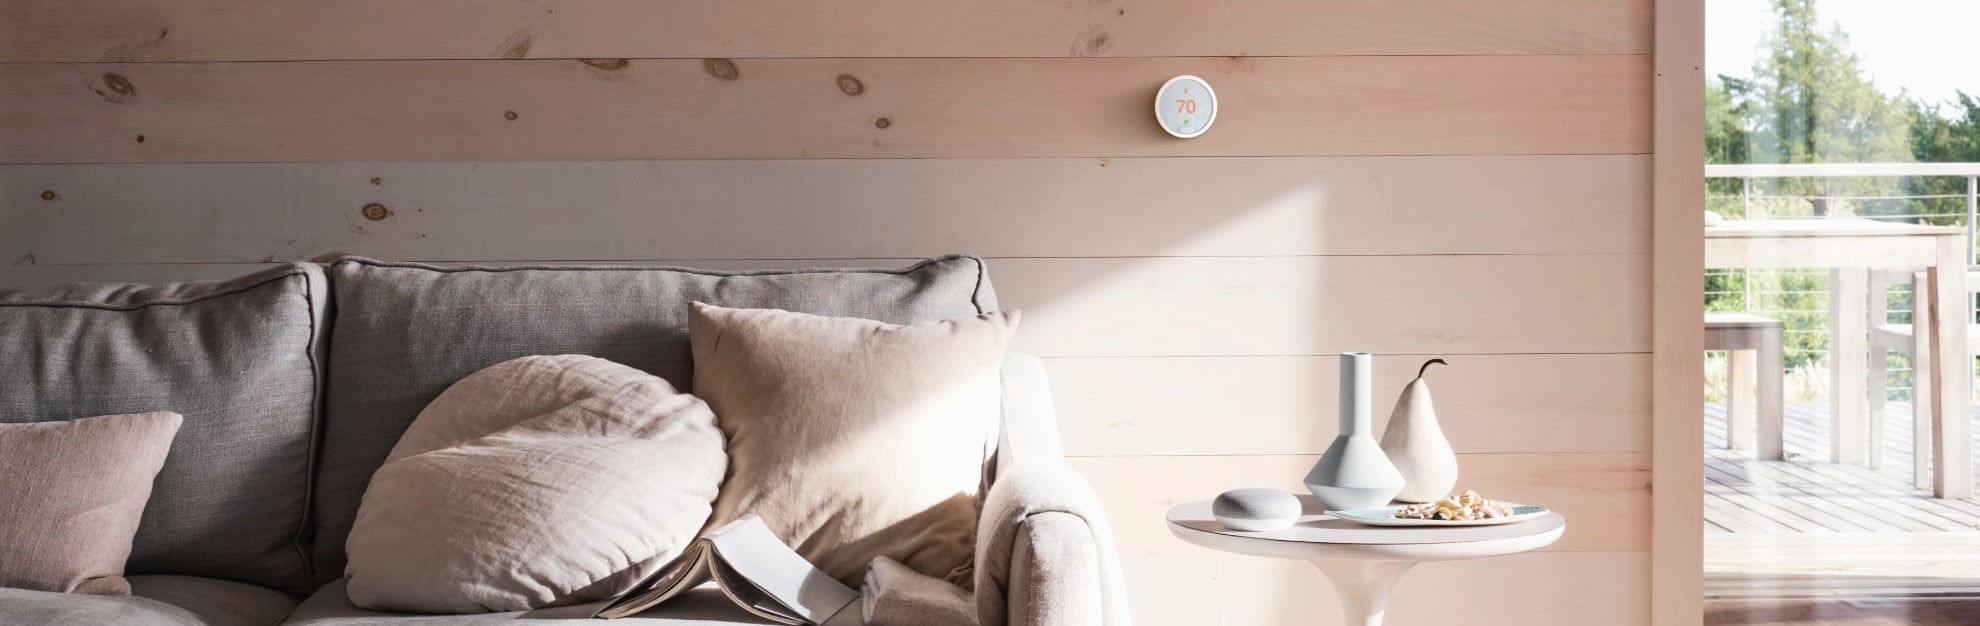 Vivint Home Automation in Wichita Falls